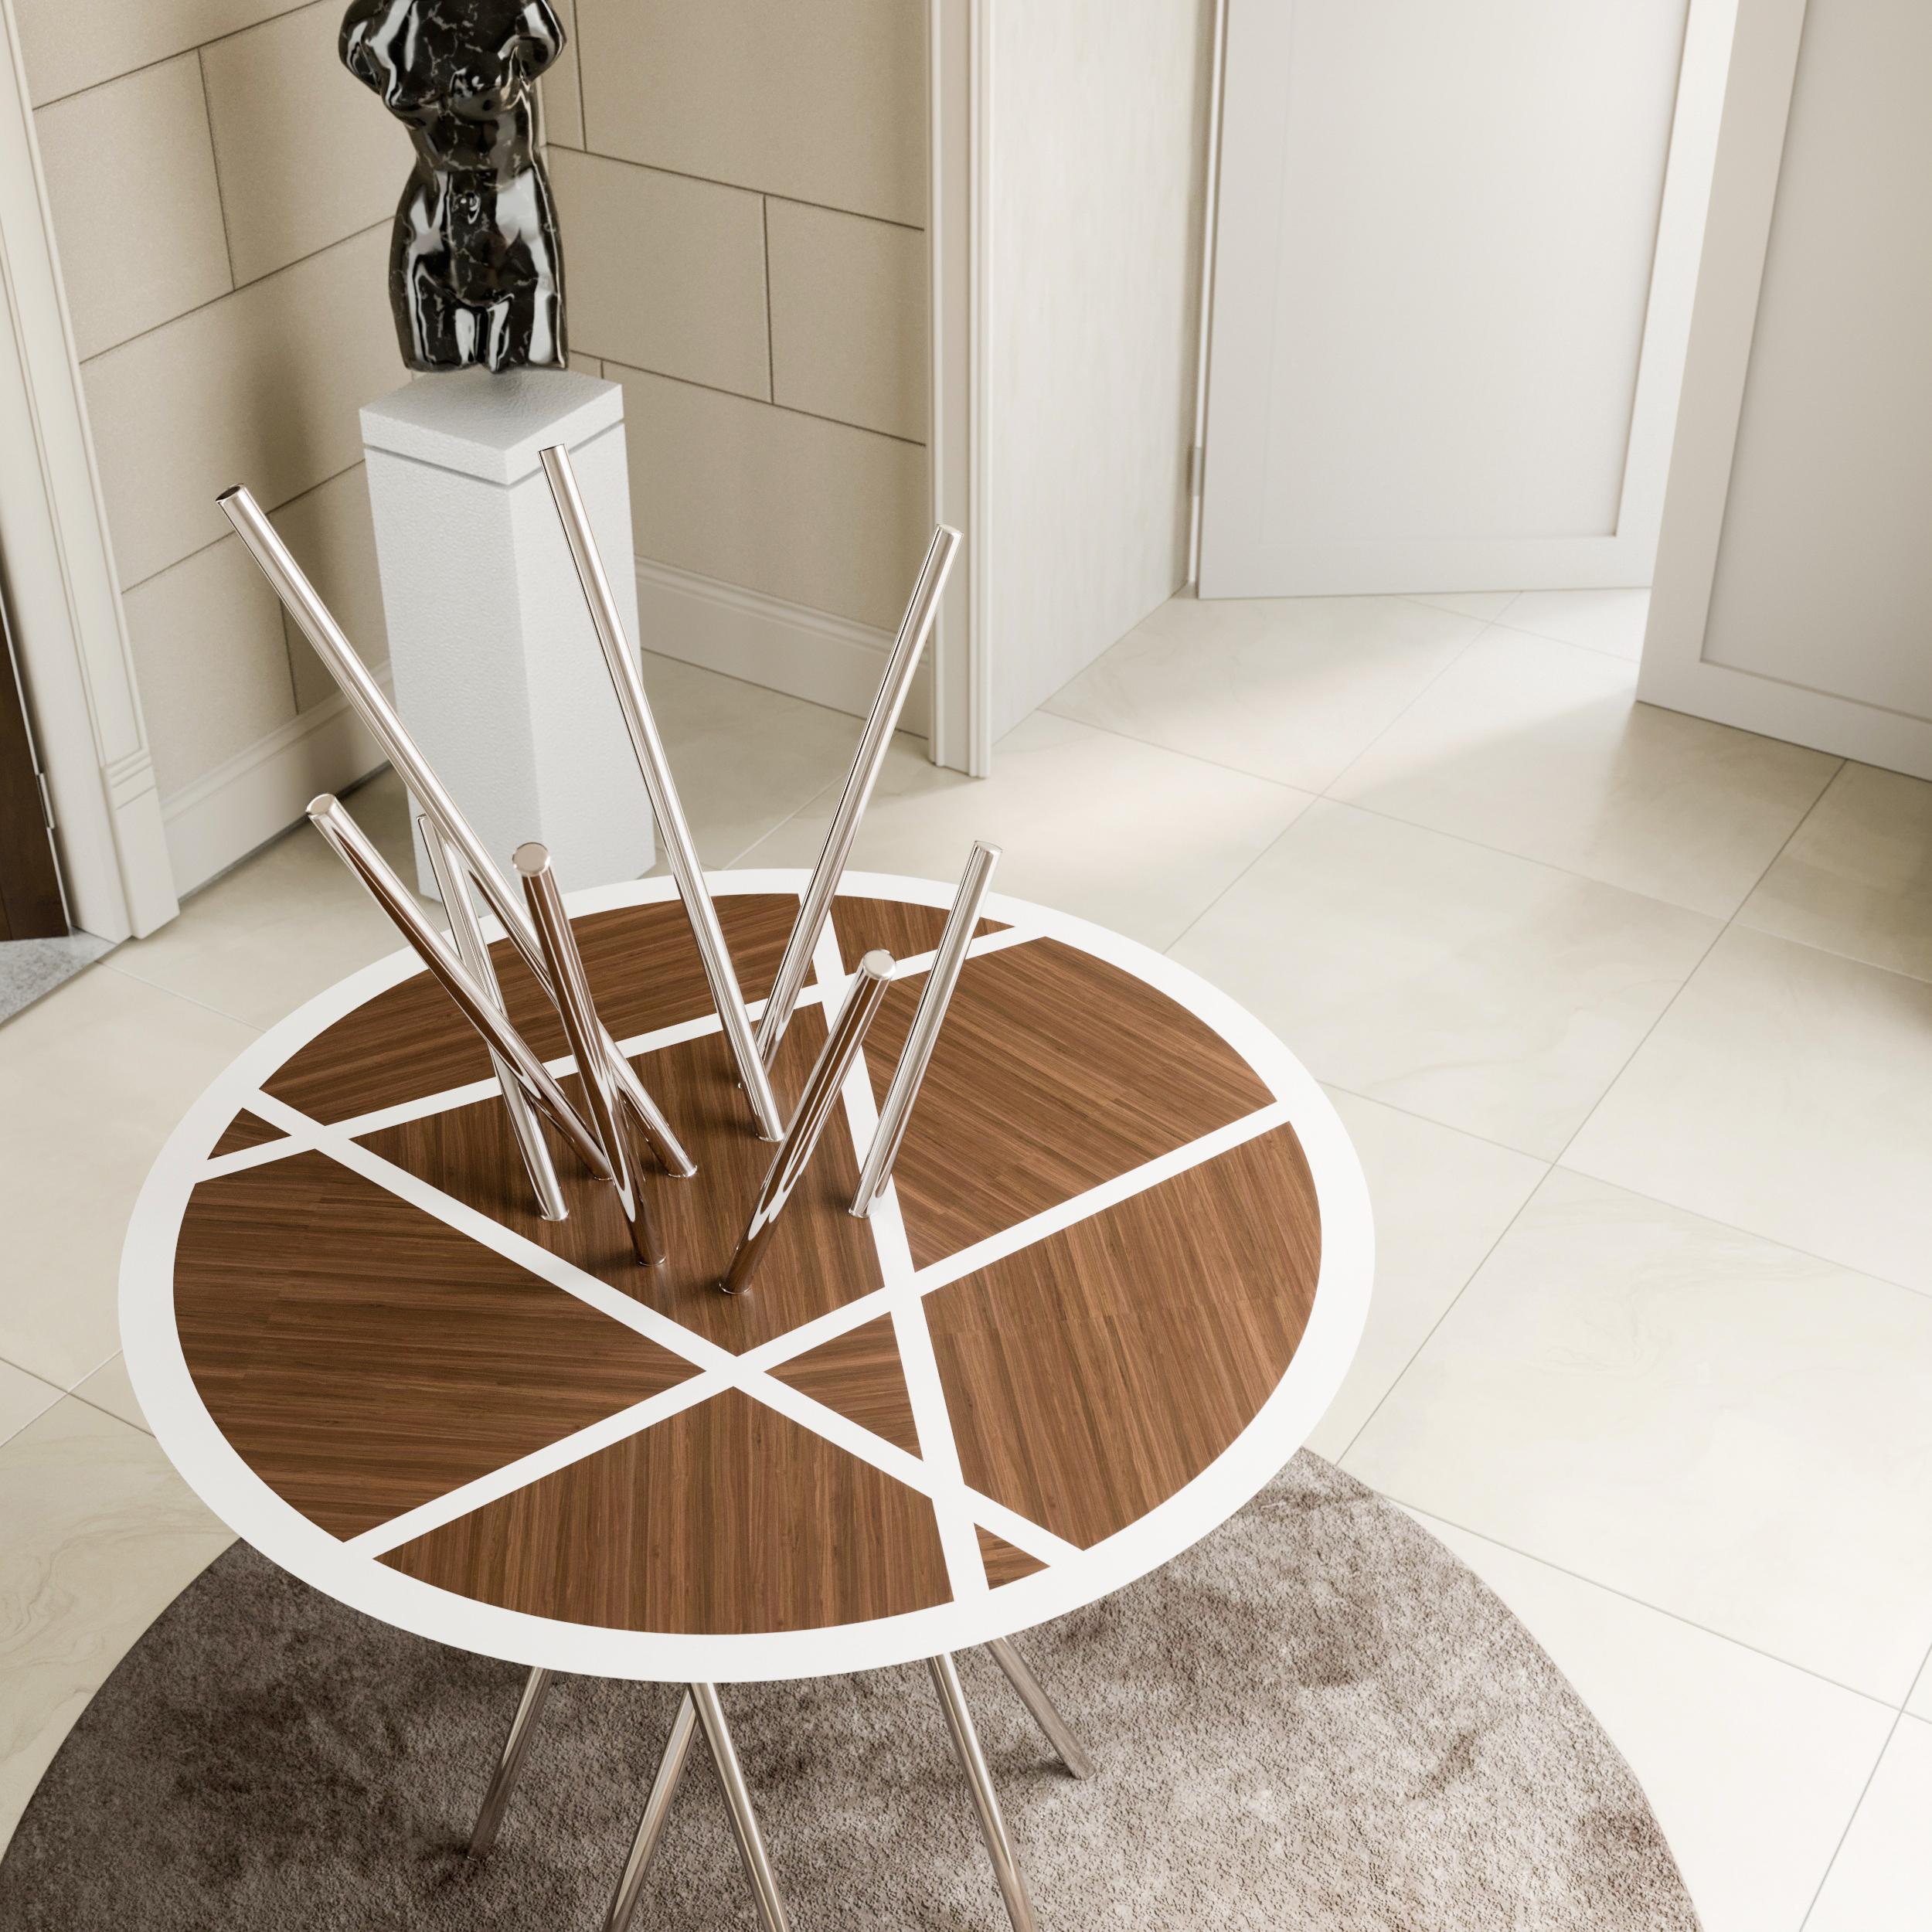 Modern Round Pedestal Table Walnut Wood White Lacquer Brushed Stainless Steel For Sale 3